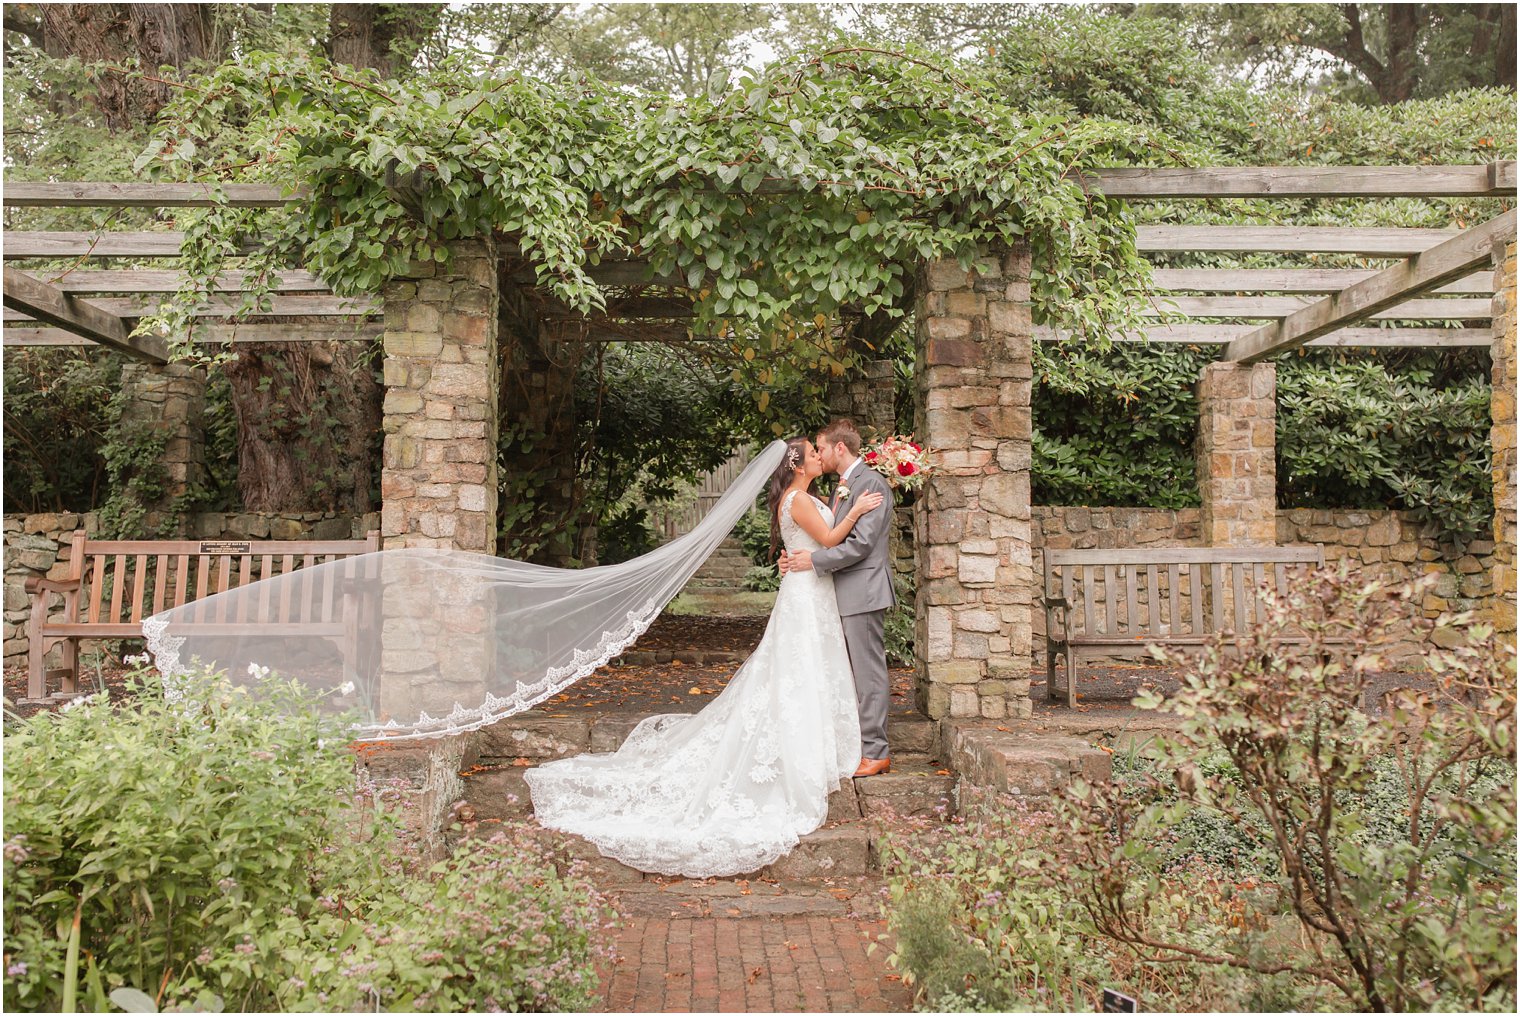 Pronovias lace wedding gown photographed at Olde Mill Inn by Idalia Photography